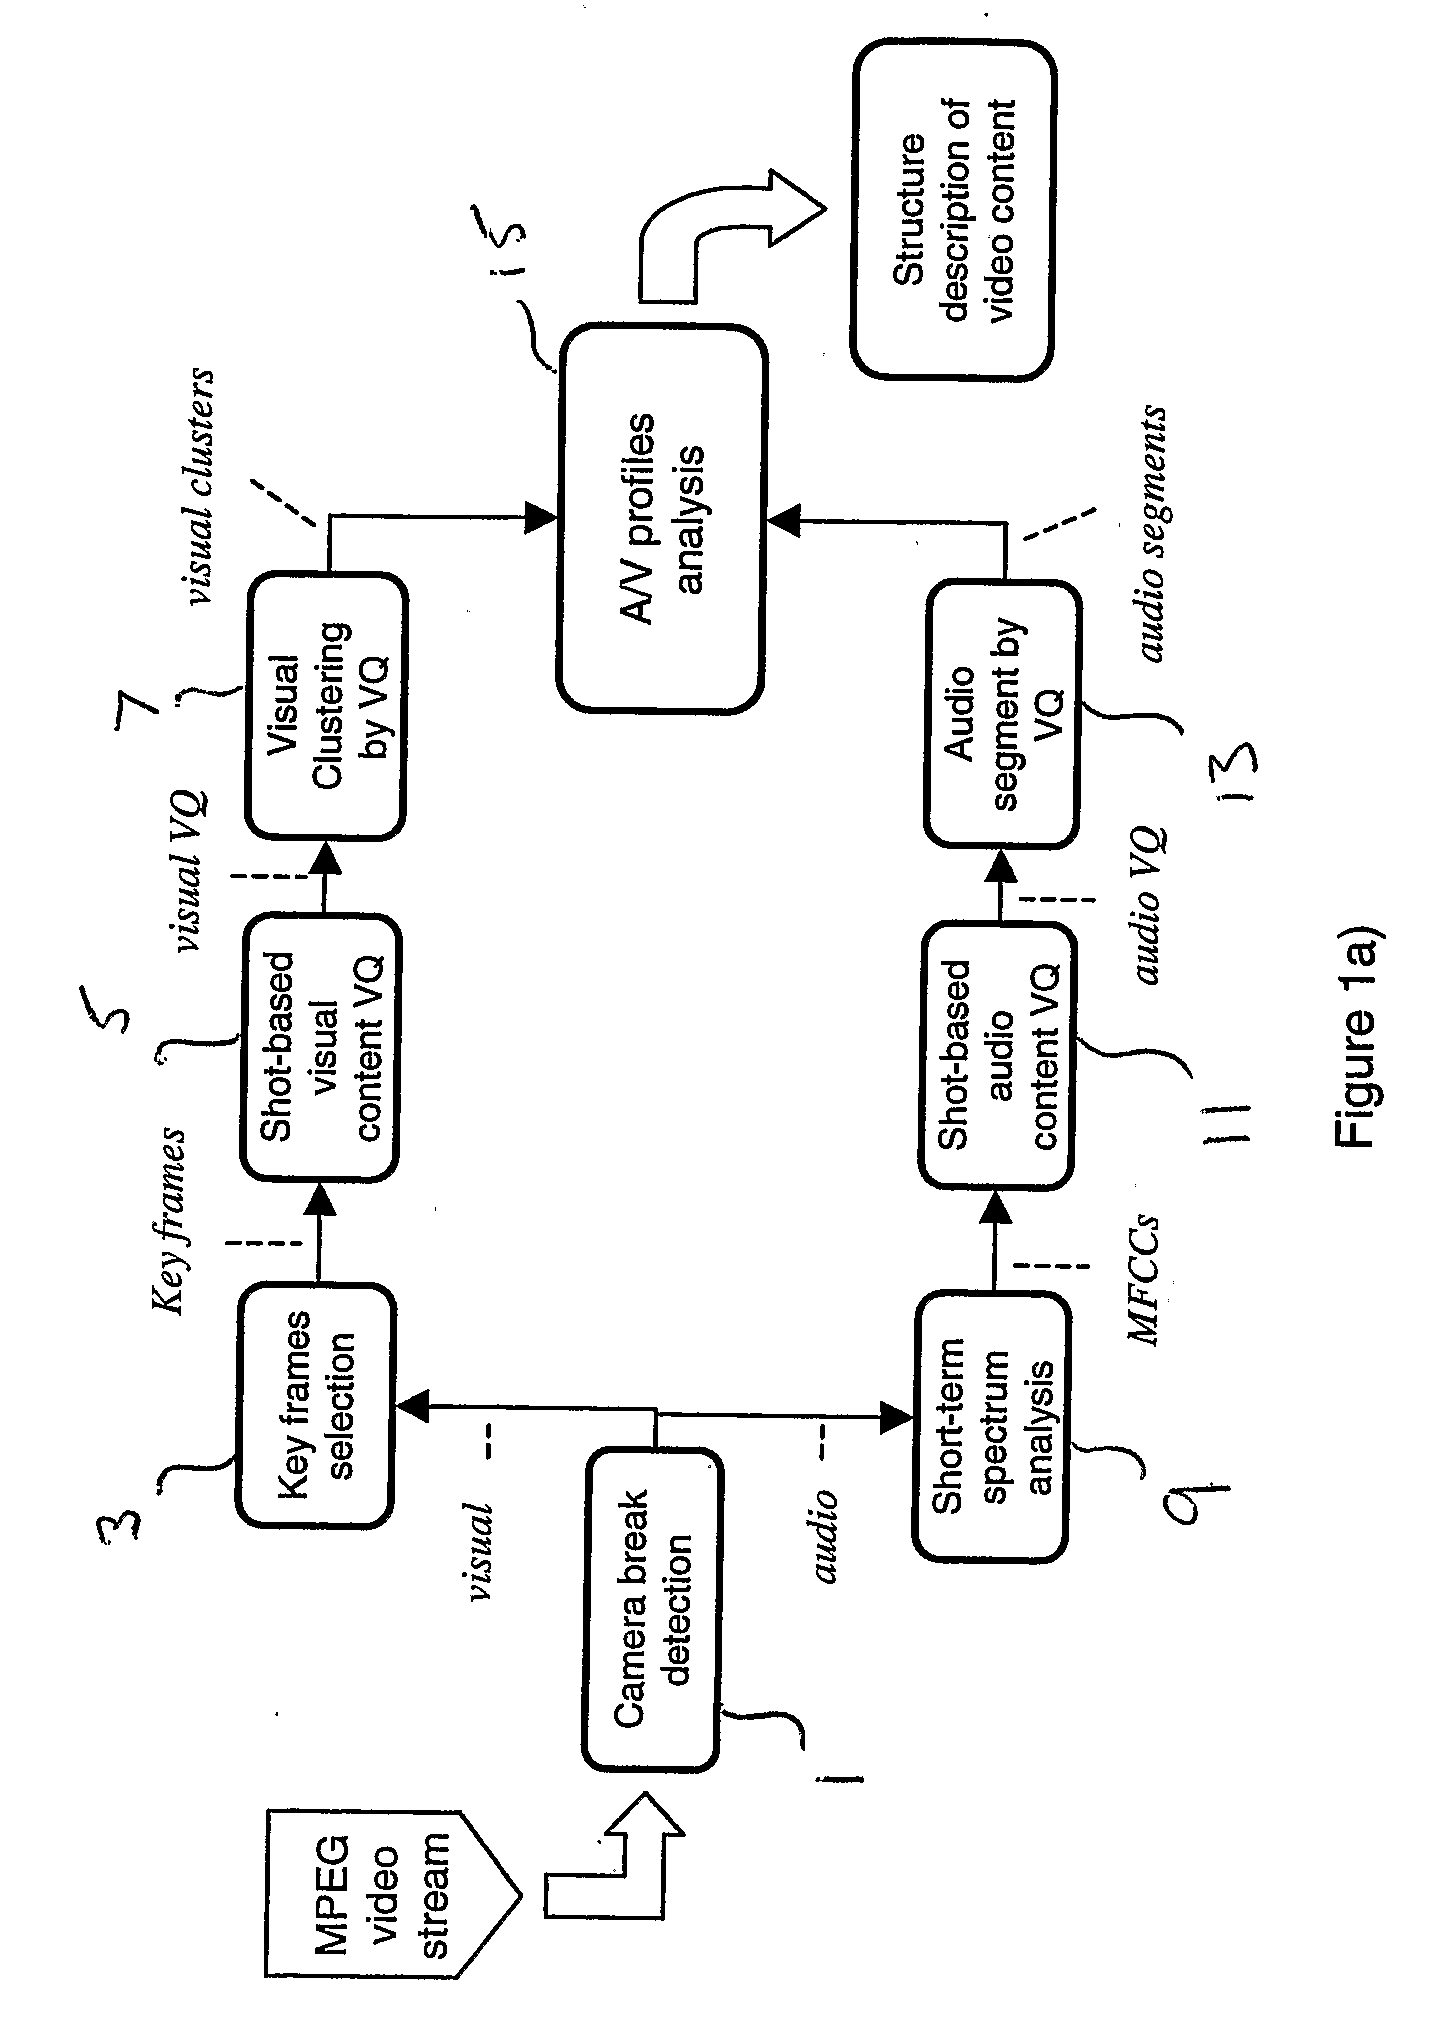 Method And System For Semantically Segmenting Scenes Of A Video Sequence